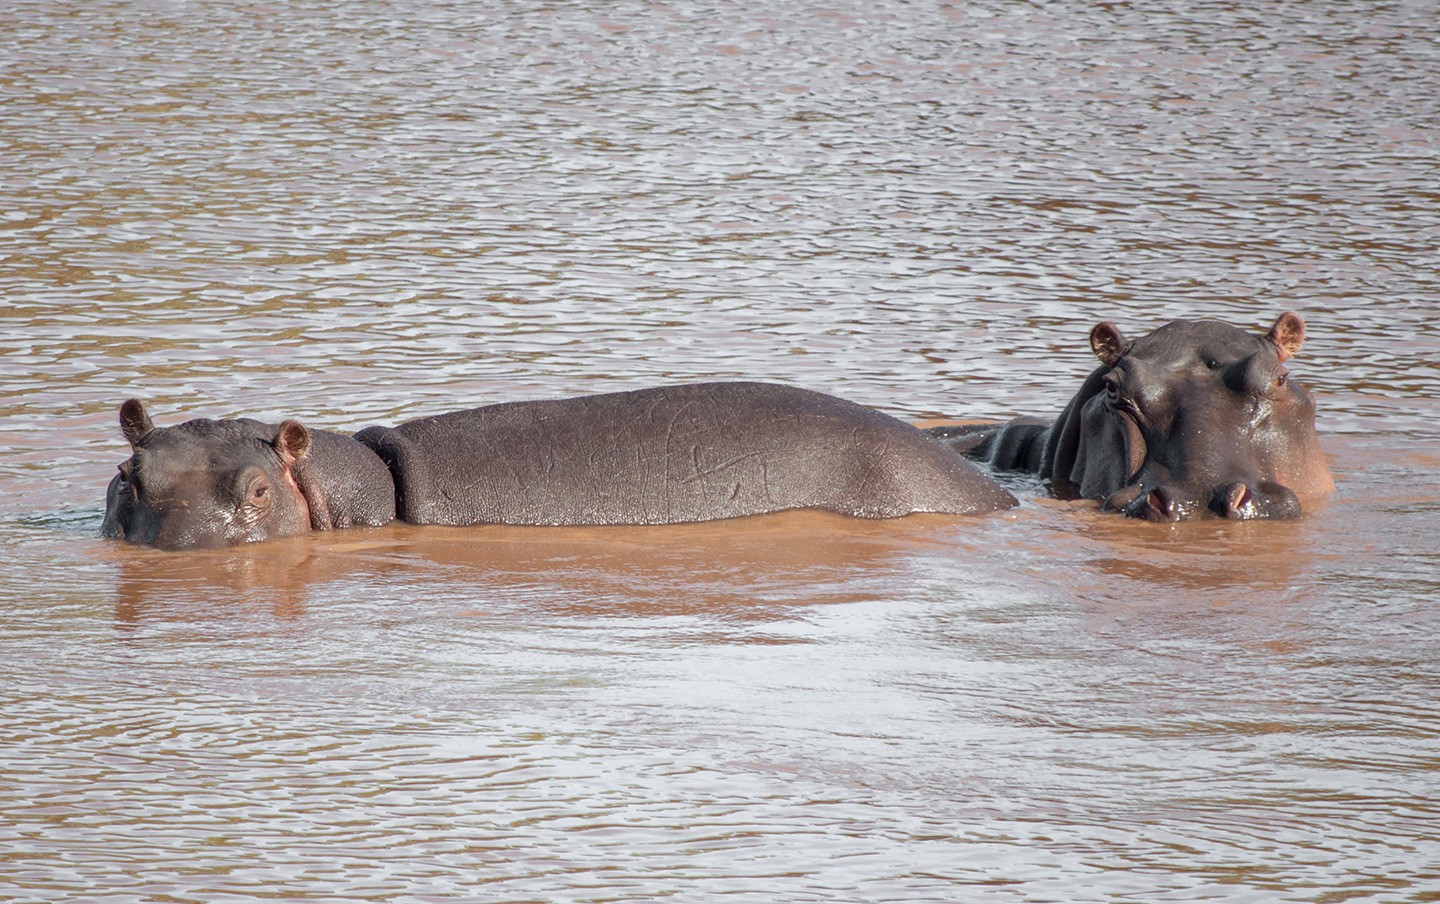 Hippos in Olifants River